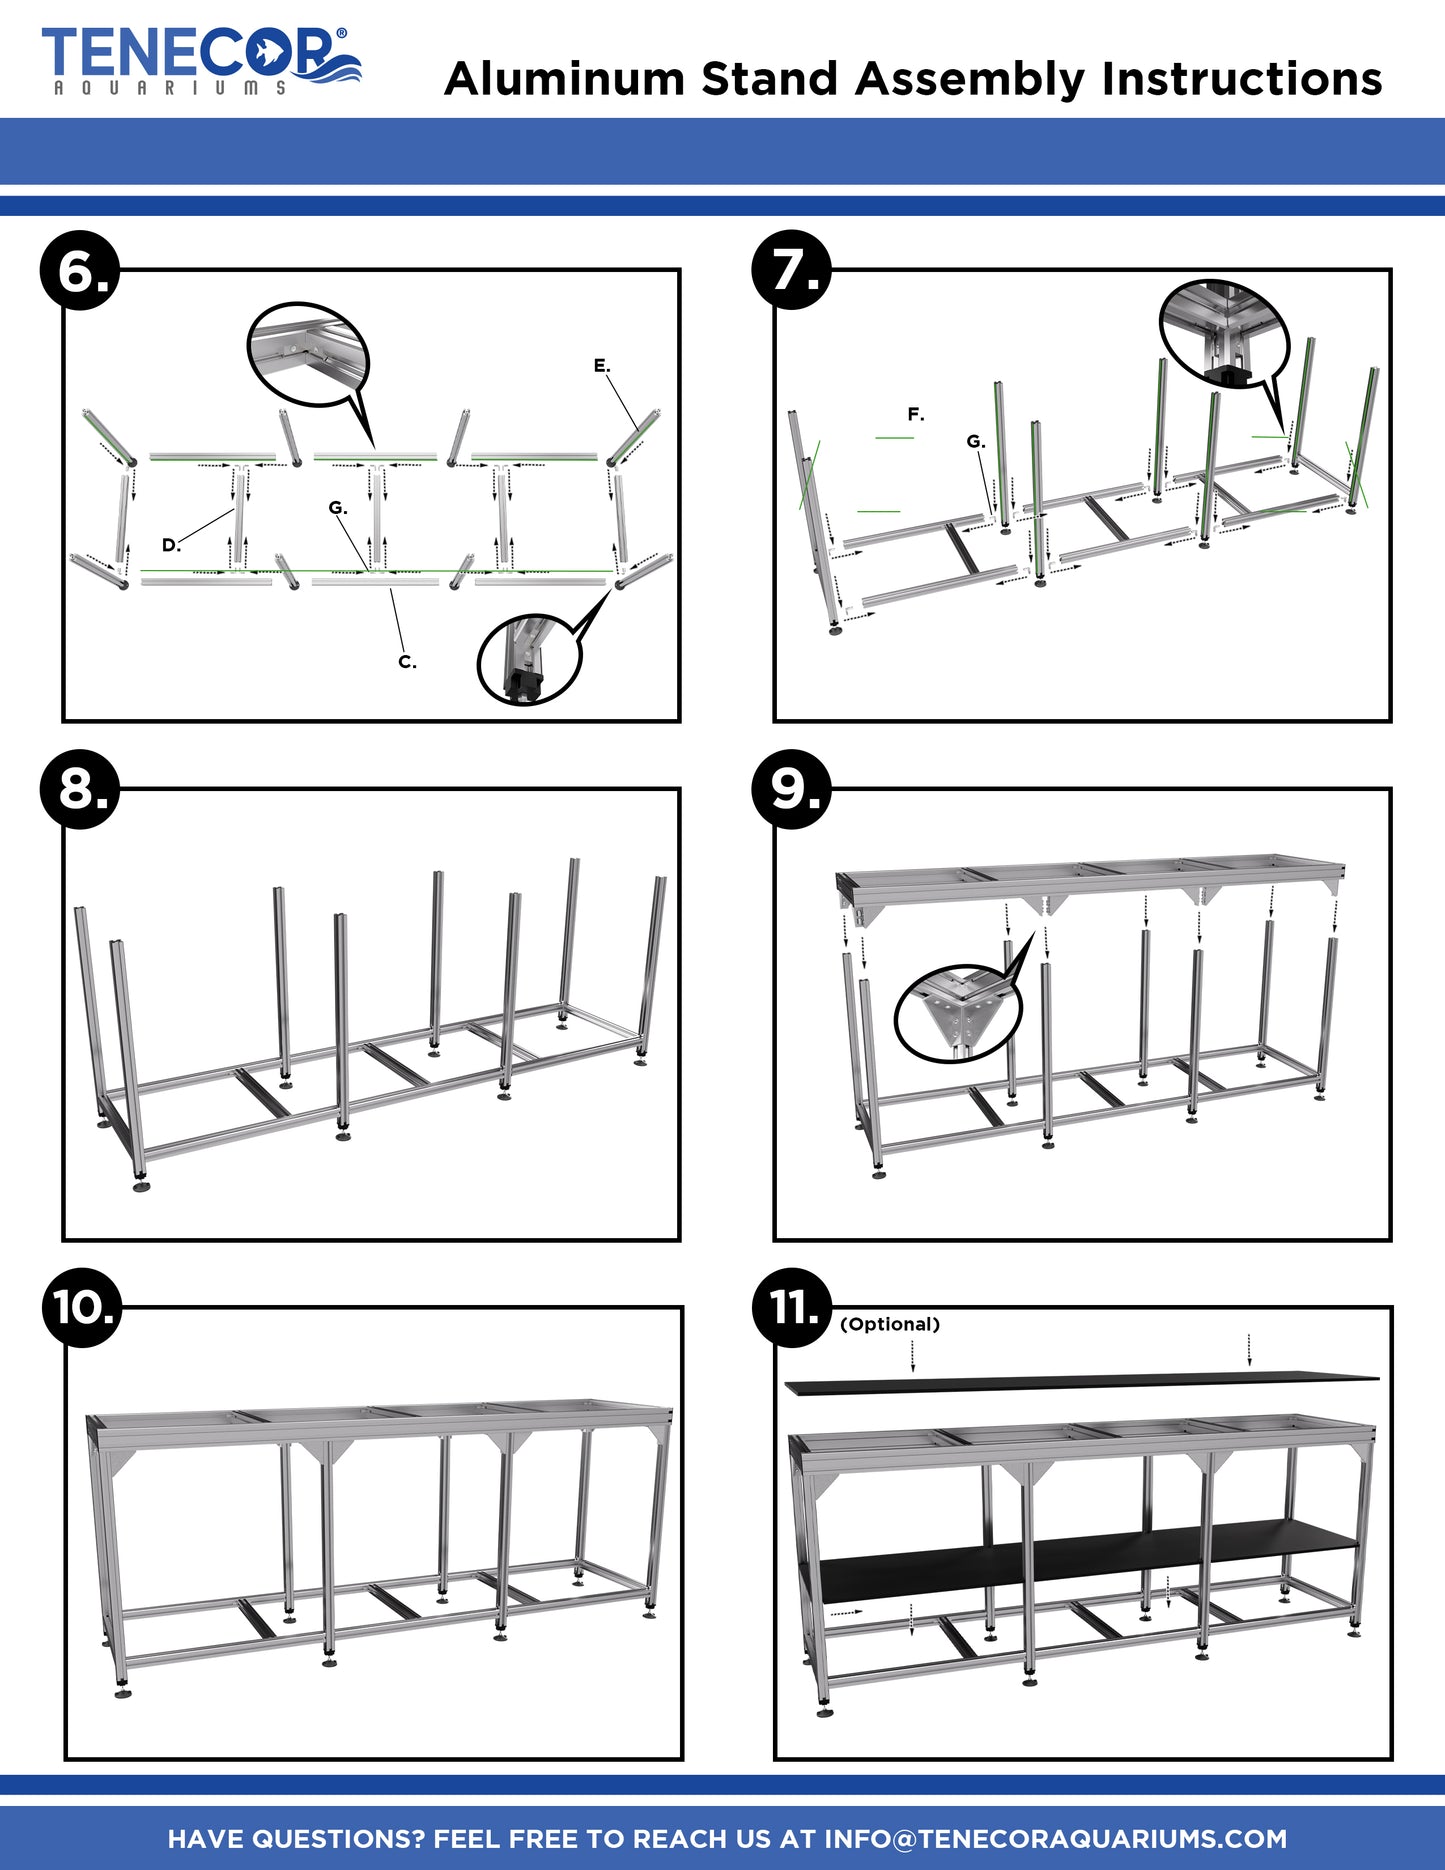 Magnum Open Frame Stand Assembly Instructions